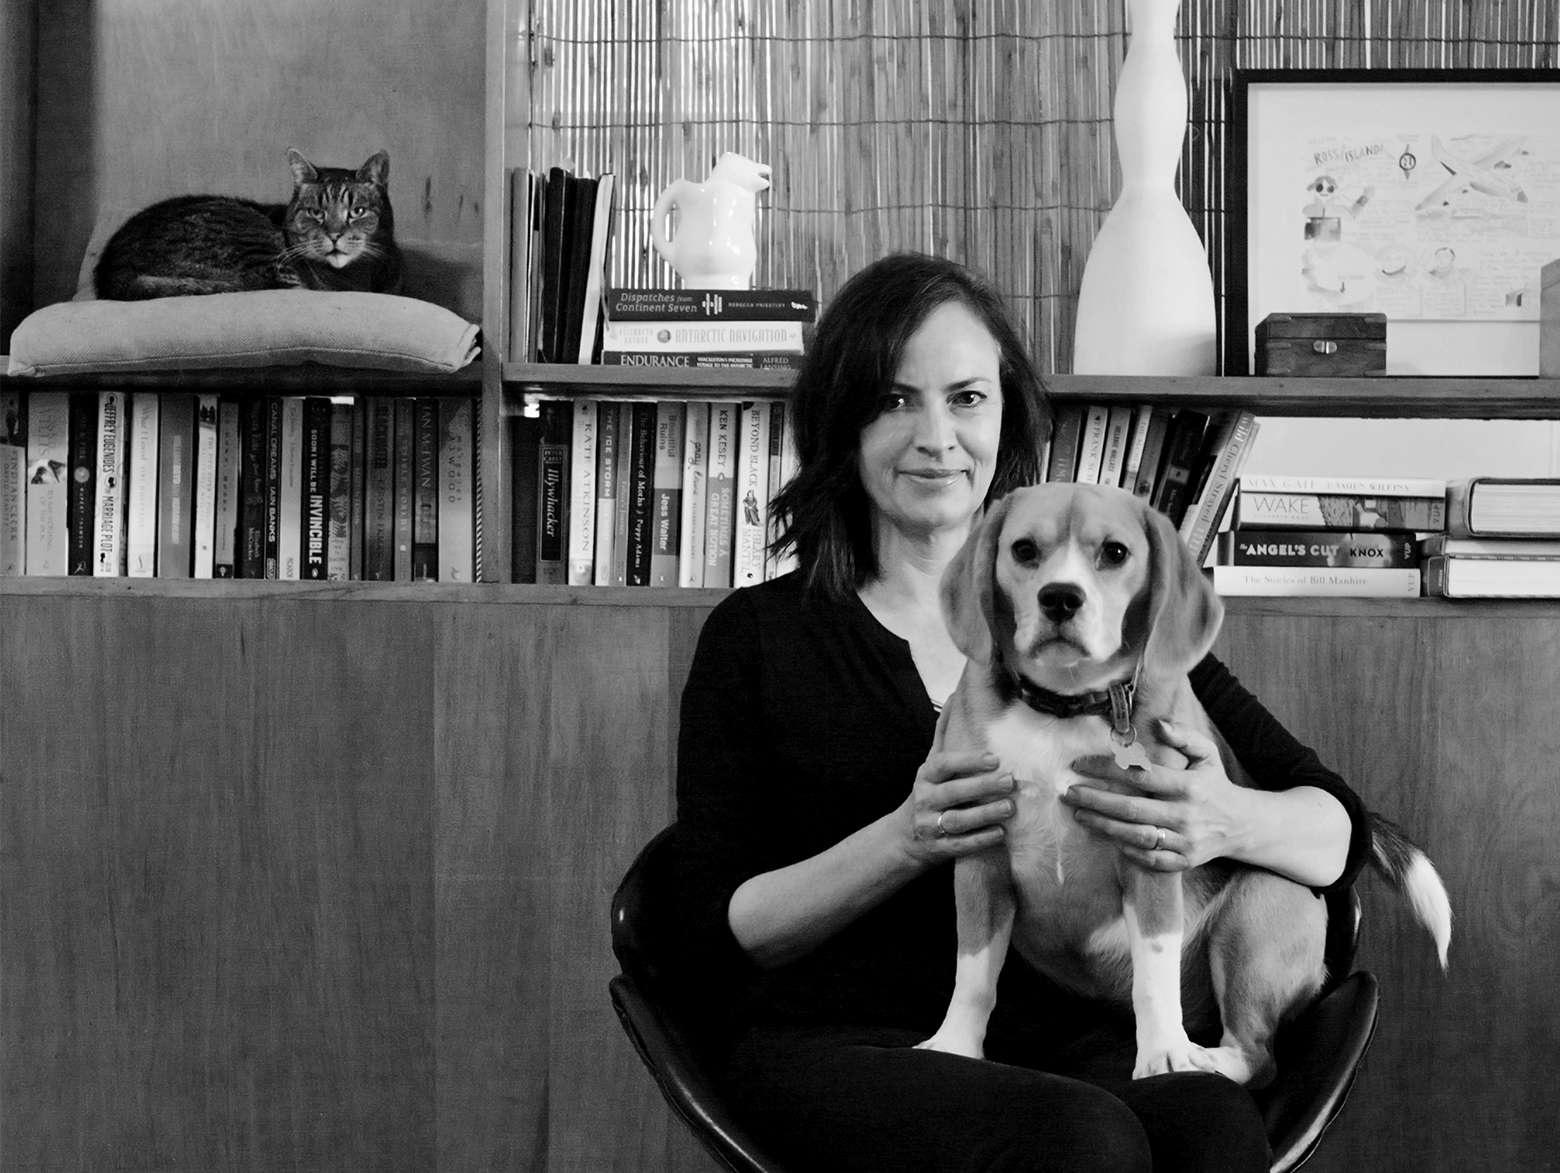 Rebecca Priestley sits in front of a bookcase with a dog on her lap, as a cat on a pillow on a shelf in the bookcase looks on.